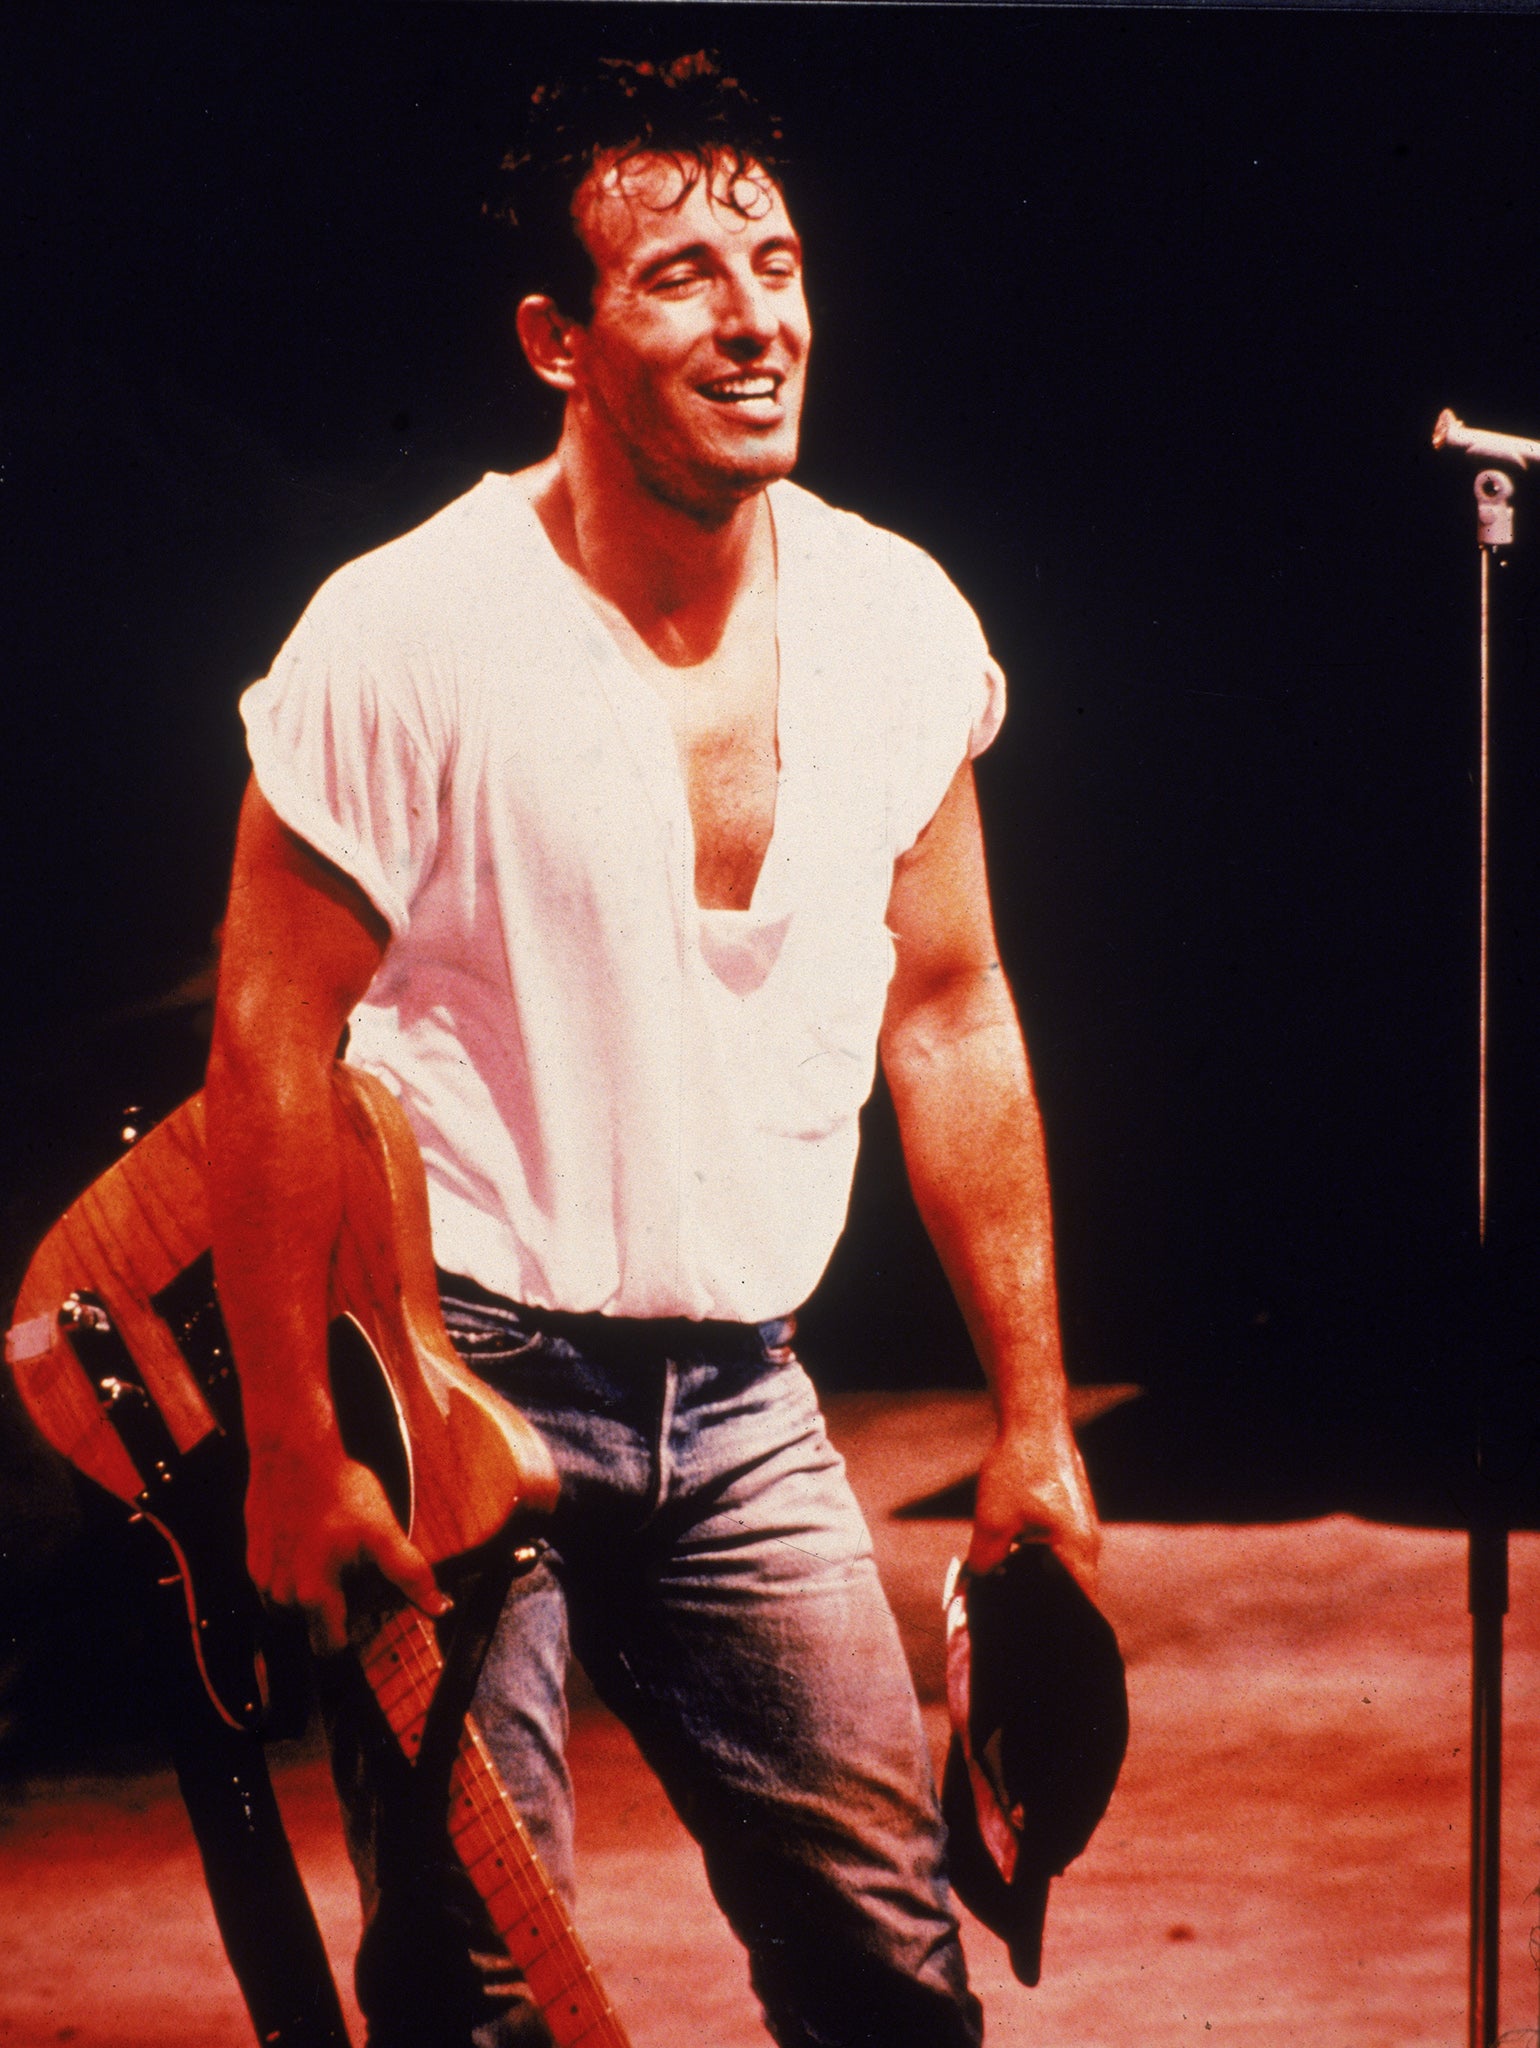 Springsteen had a huge impact in the 1970s and 1980s